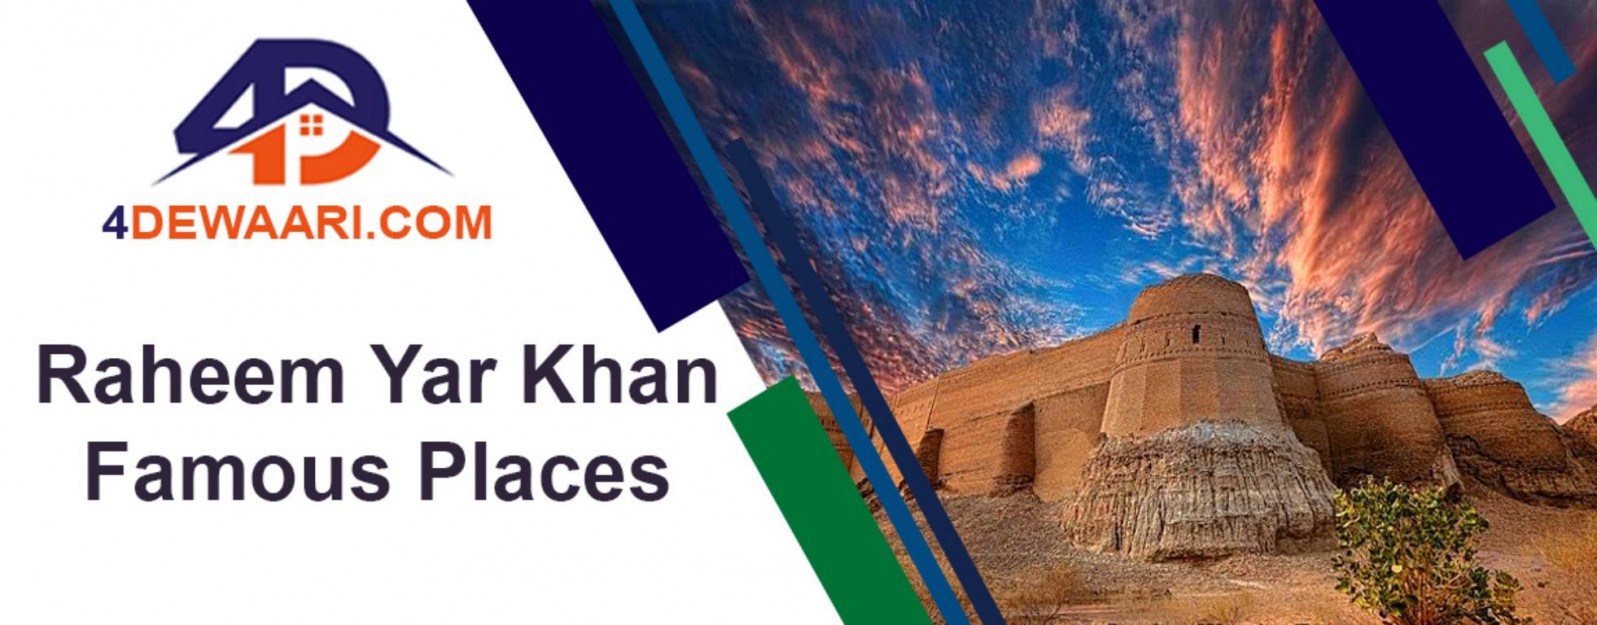 Raheem Yar Khan Famous Places to Visit in Every Season 